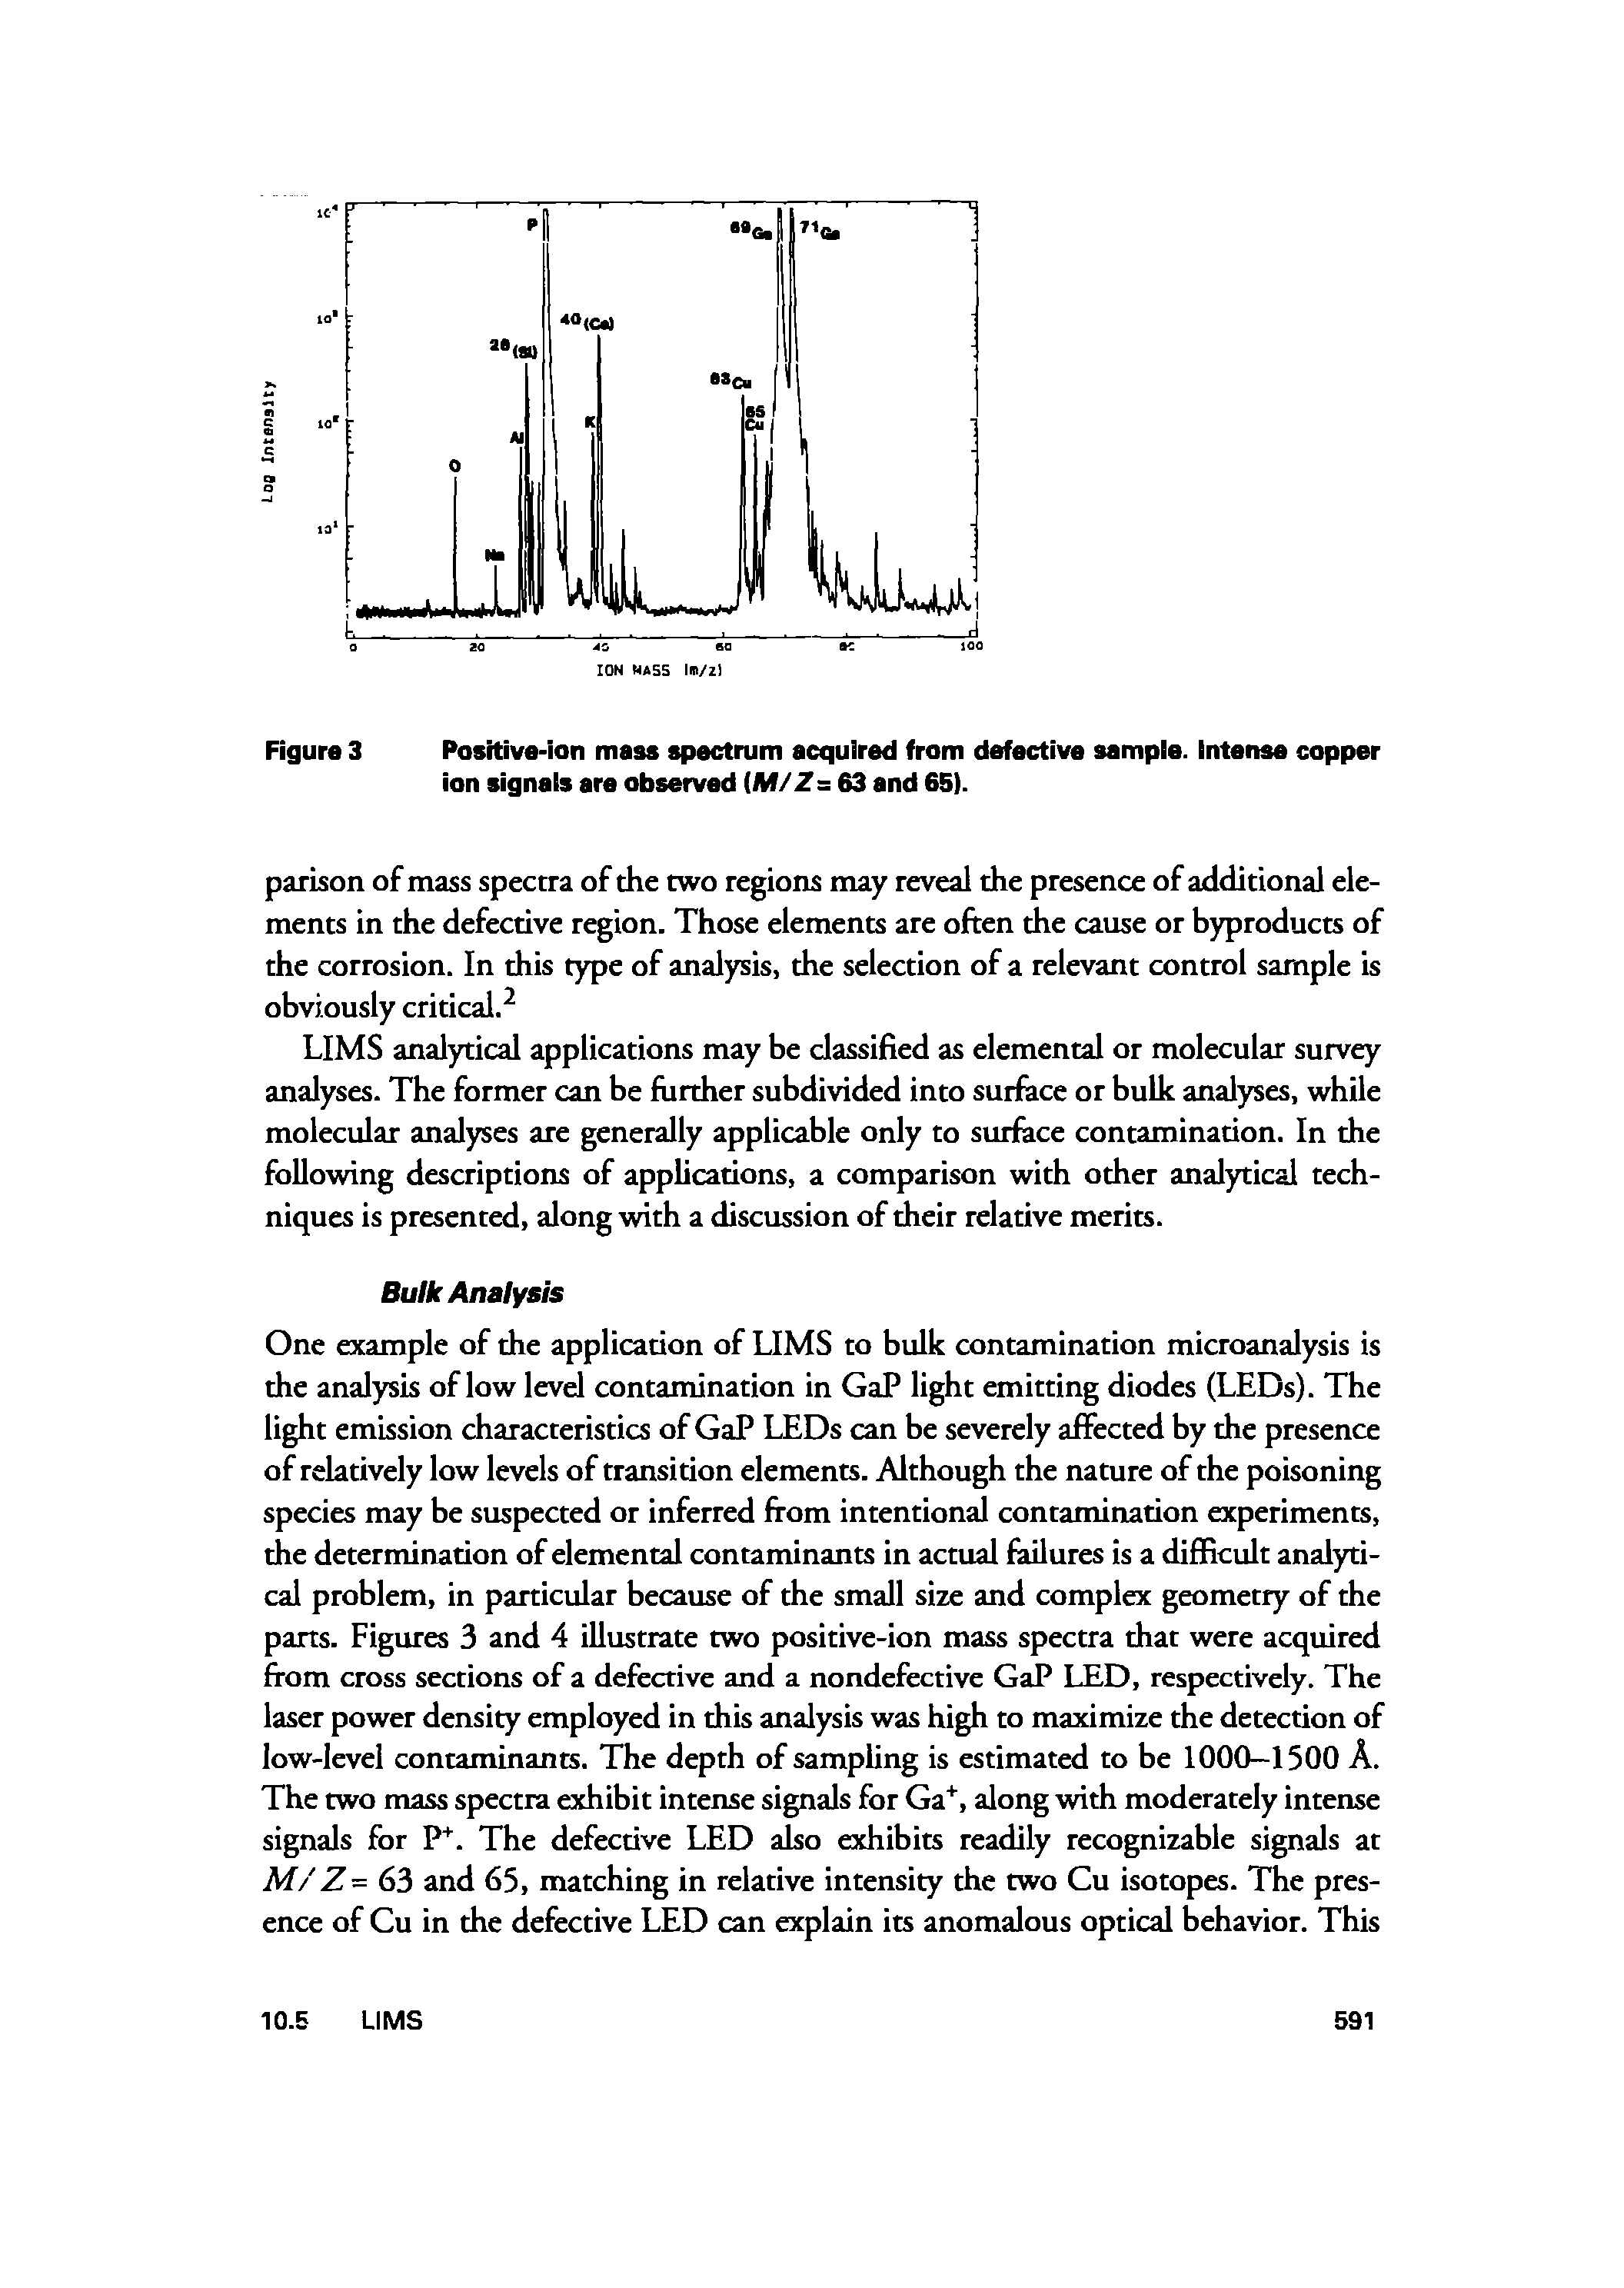 Figure 3 Positive-ion mass spectrum acquired from defective sampie. intense copper ion signals are observed iM/Z = 63 and 65).